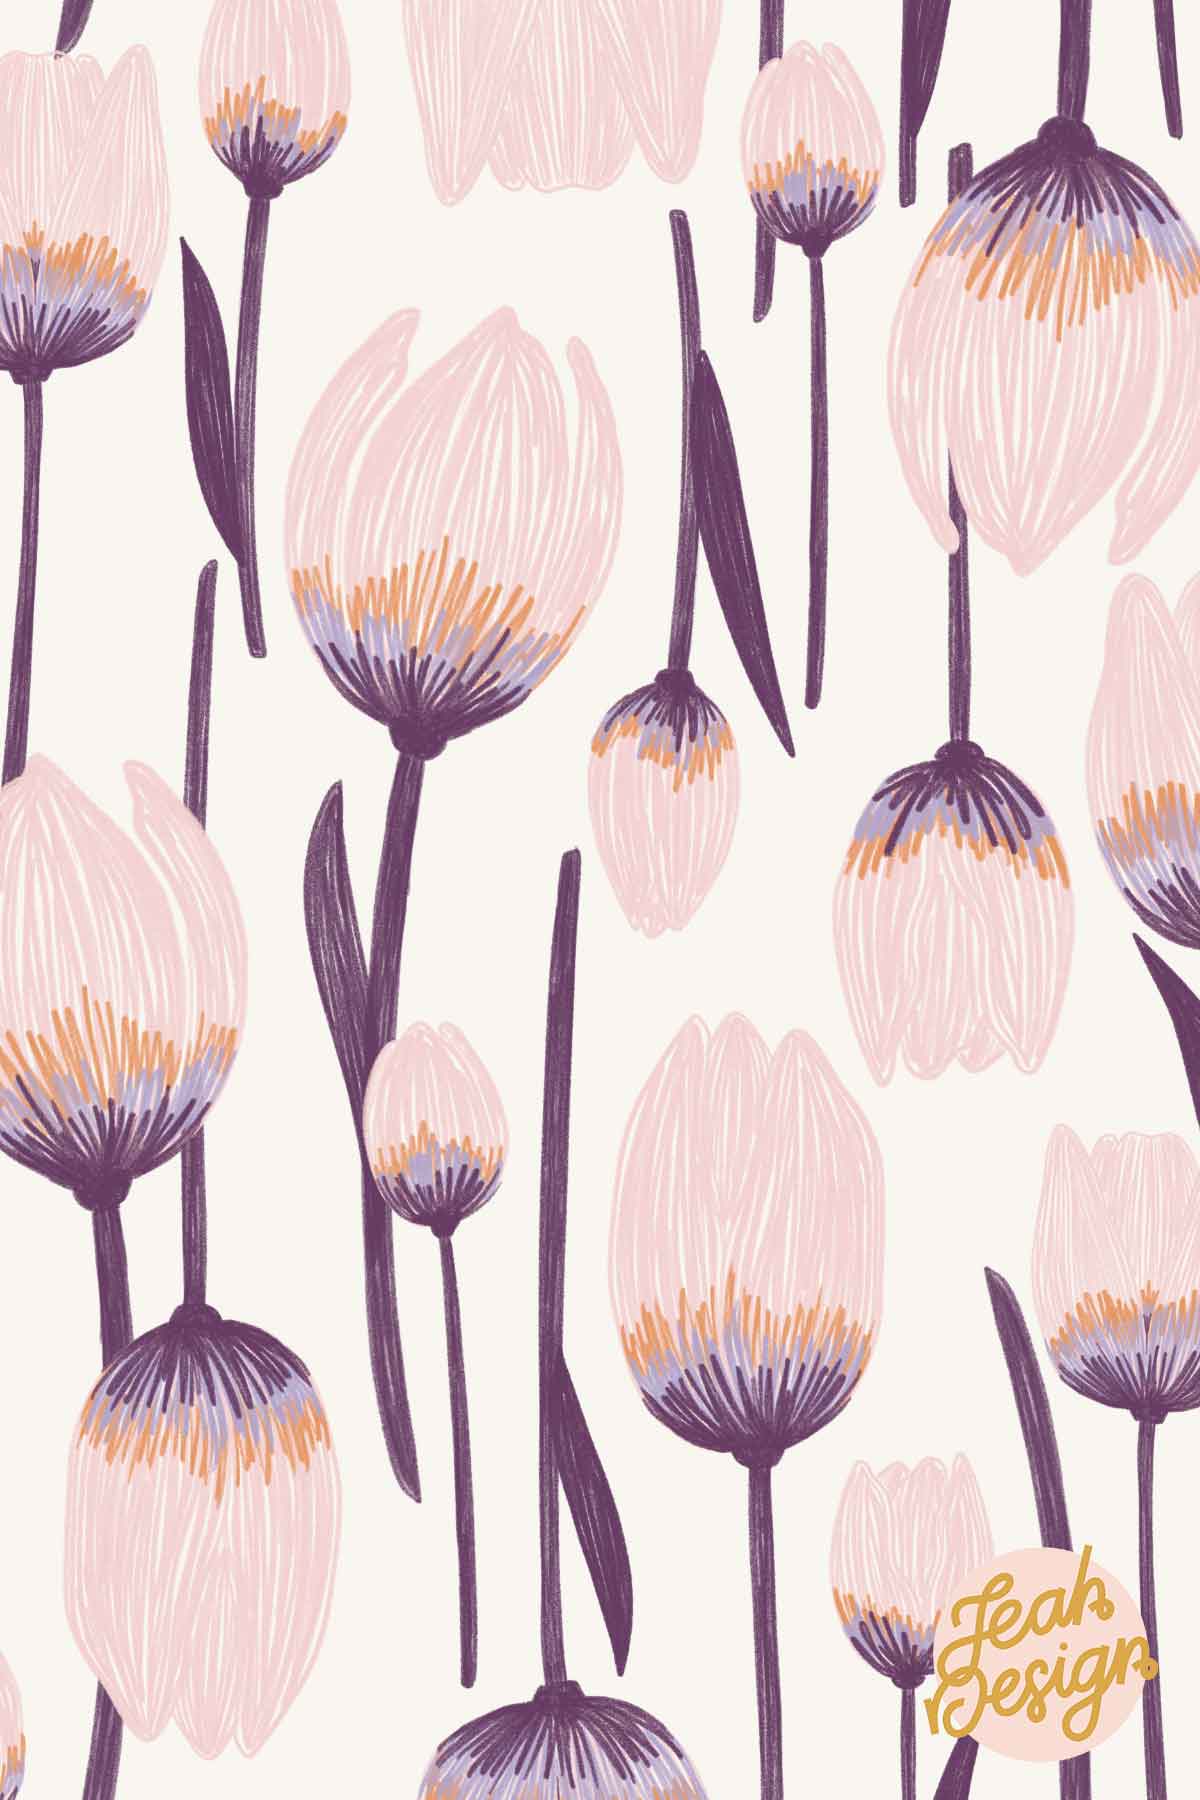 A floral two-way repeat pattern of hand-drawn tulips coloured in pastel pink, apricot crush, digital lavender and dusted grape.